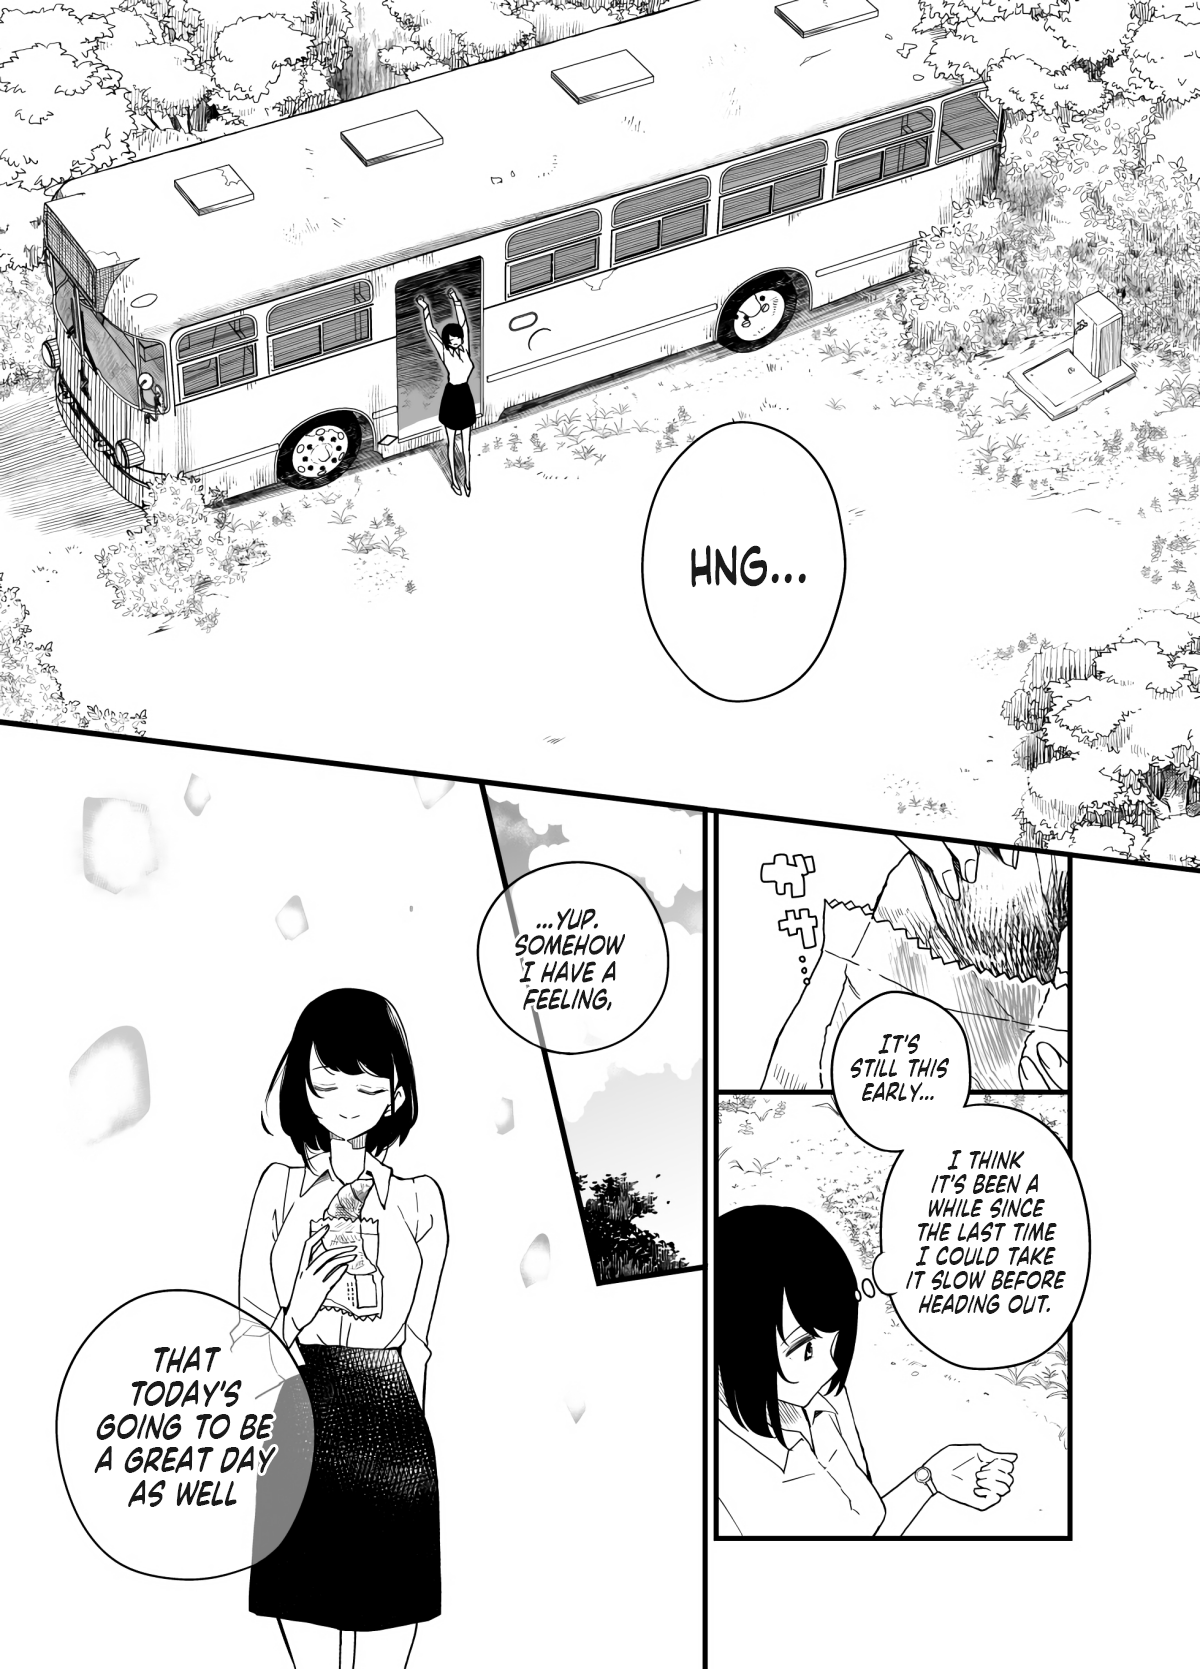 Living In An Abandoned Bus - Page 3